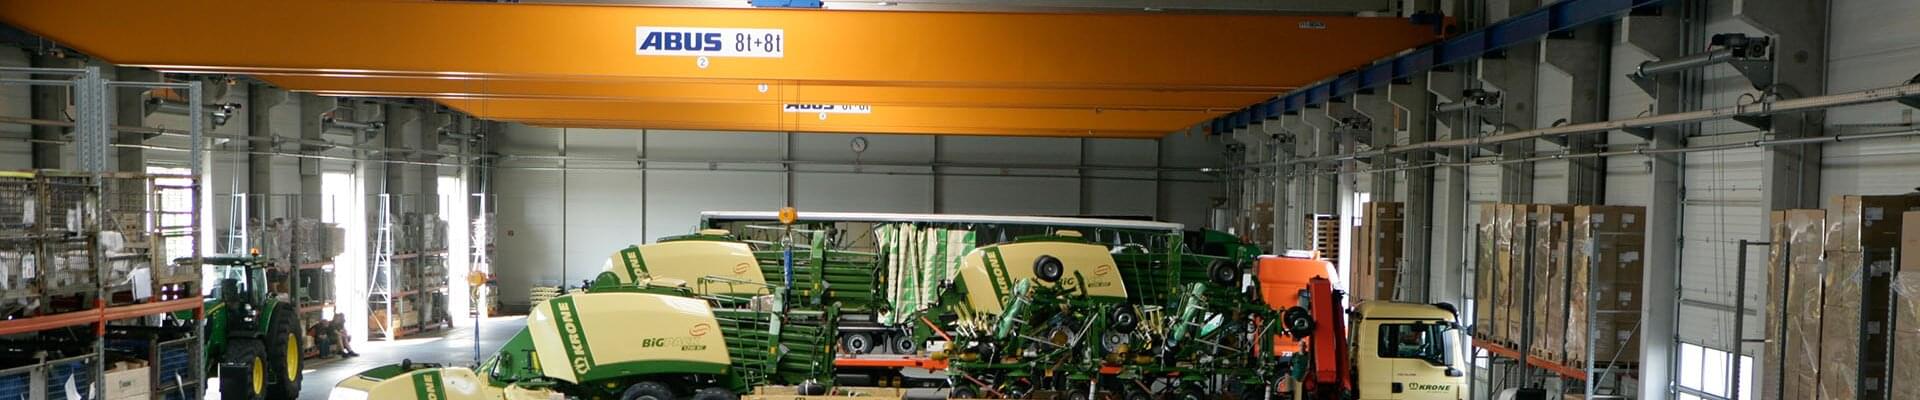 Crane with lifting capacity of 8 t and 8 t in production hall for agricultural machinery technology in Germany